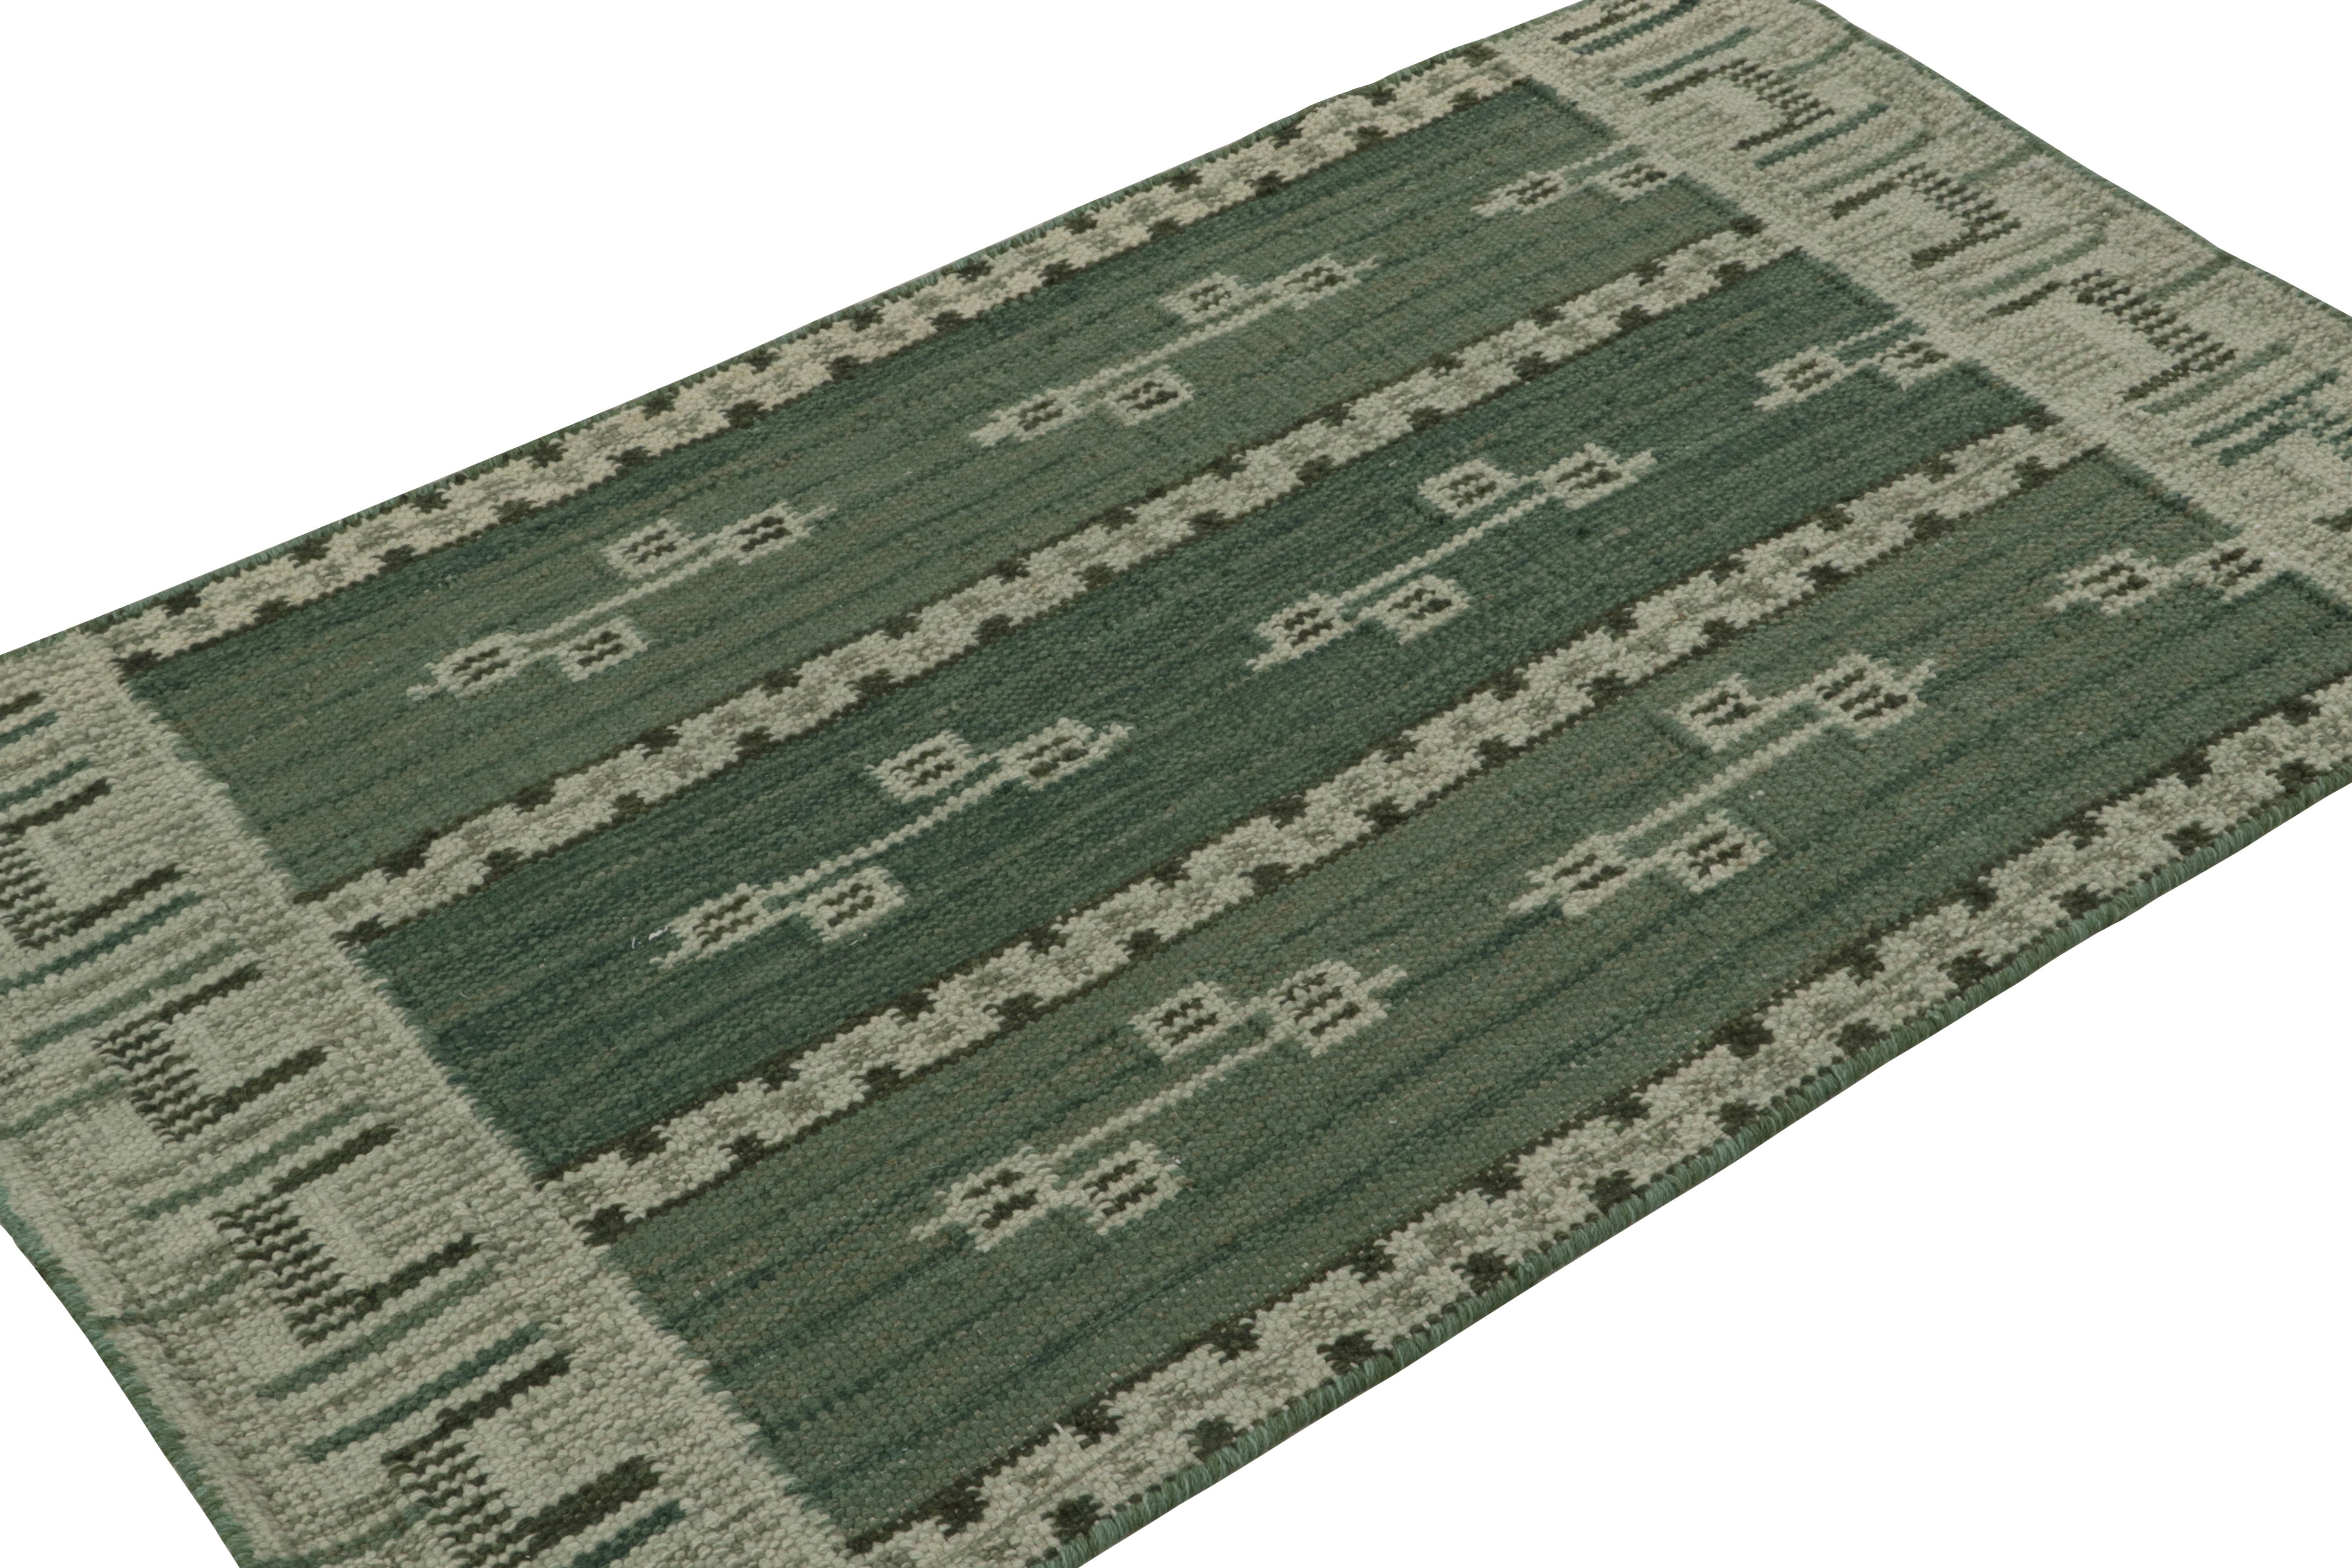 This 3x5 Kilim rug is from the flatweave line in the Scandinavian rug collection by Rug & Kilim. Handwoven in wool, cotton and natural yarns, its design is a modern take on Rollakan and Rya rugs in the Swedish Deco style. 

On the Design: 

These